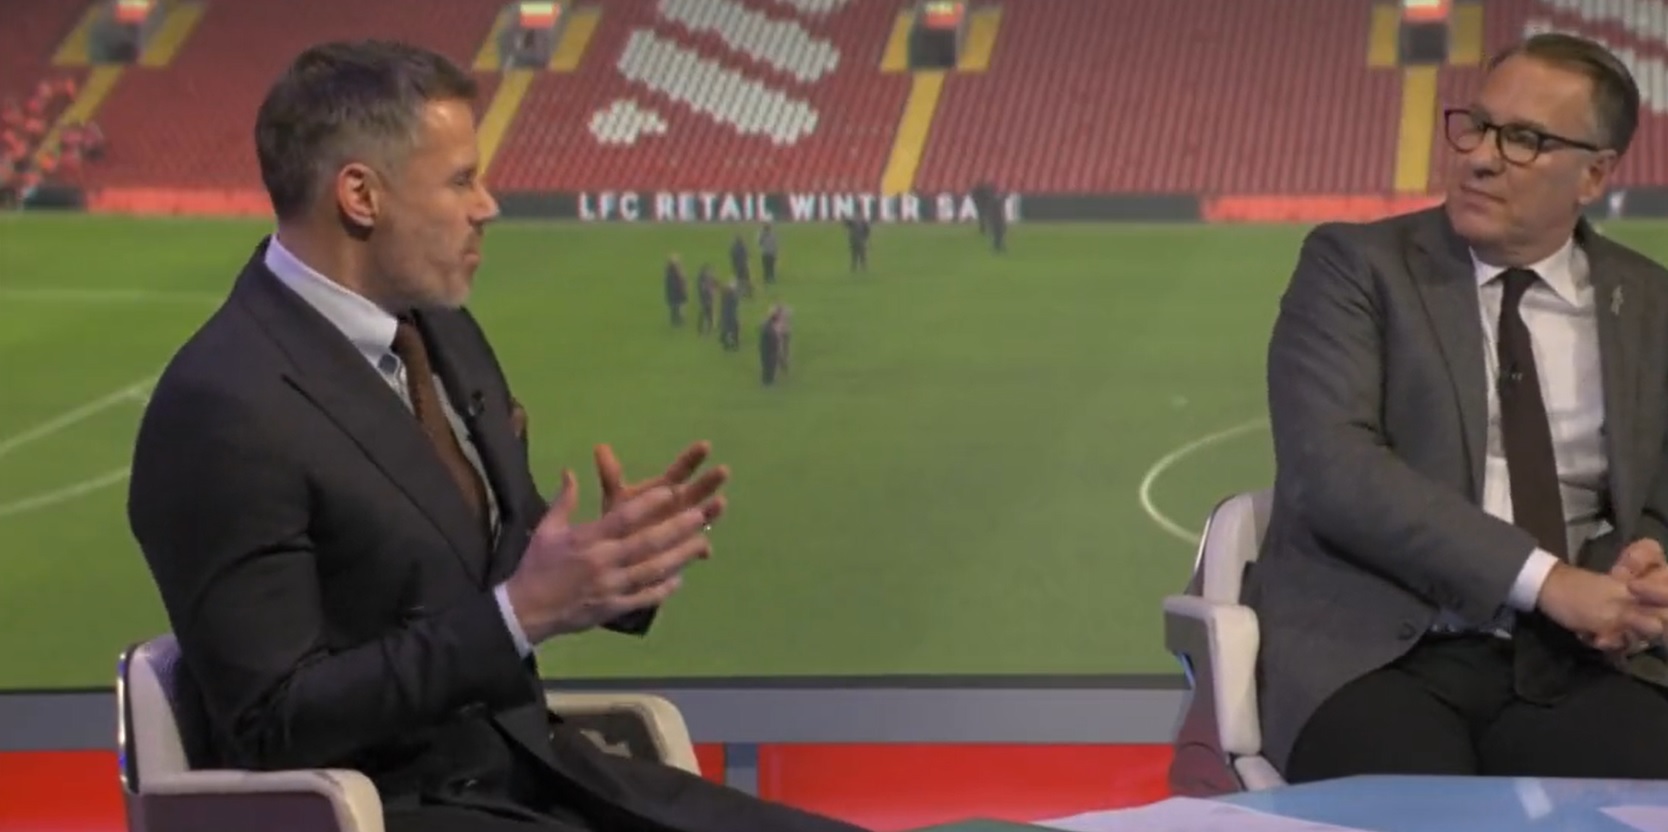 (Video) ‘Completely different’ – Merson highlights frustrating Liverpool problem not shared by top PL rivals